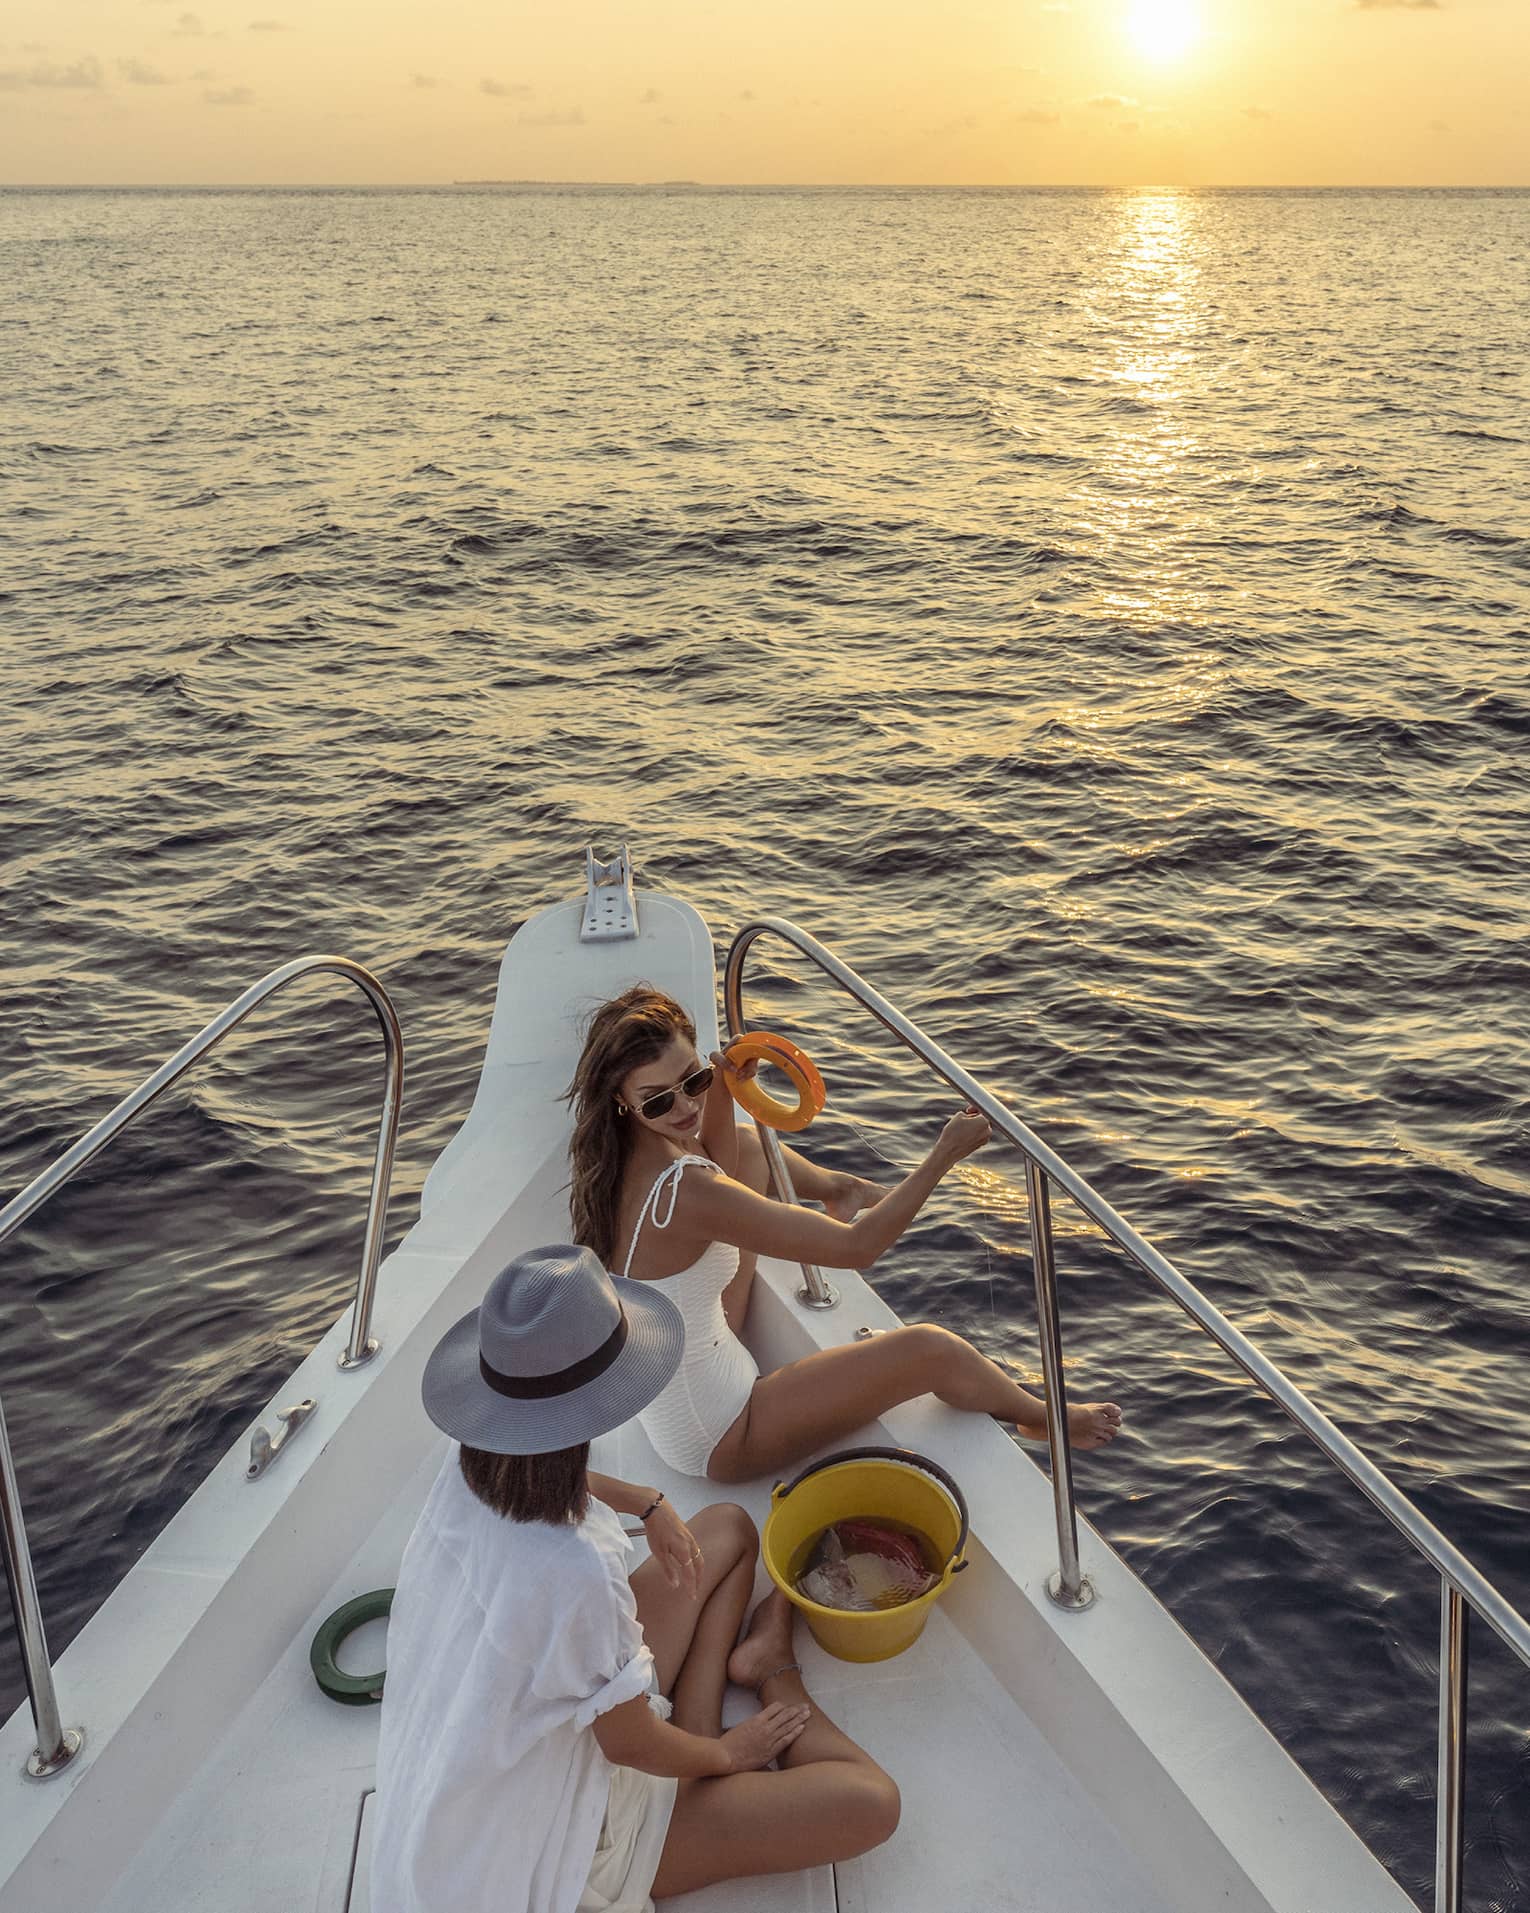 Two women enjoy snacks at the helm of a private yacht at sunset